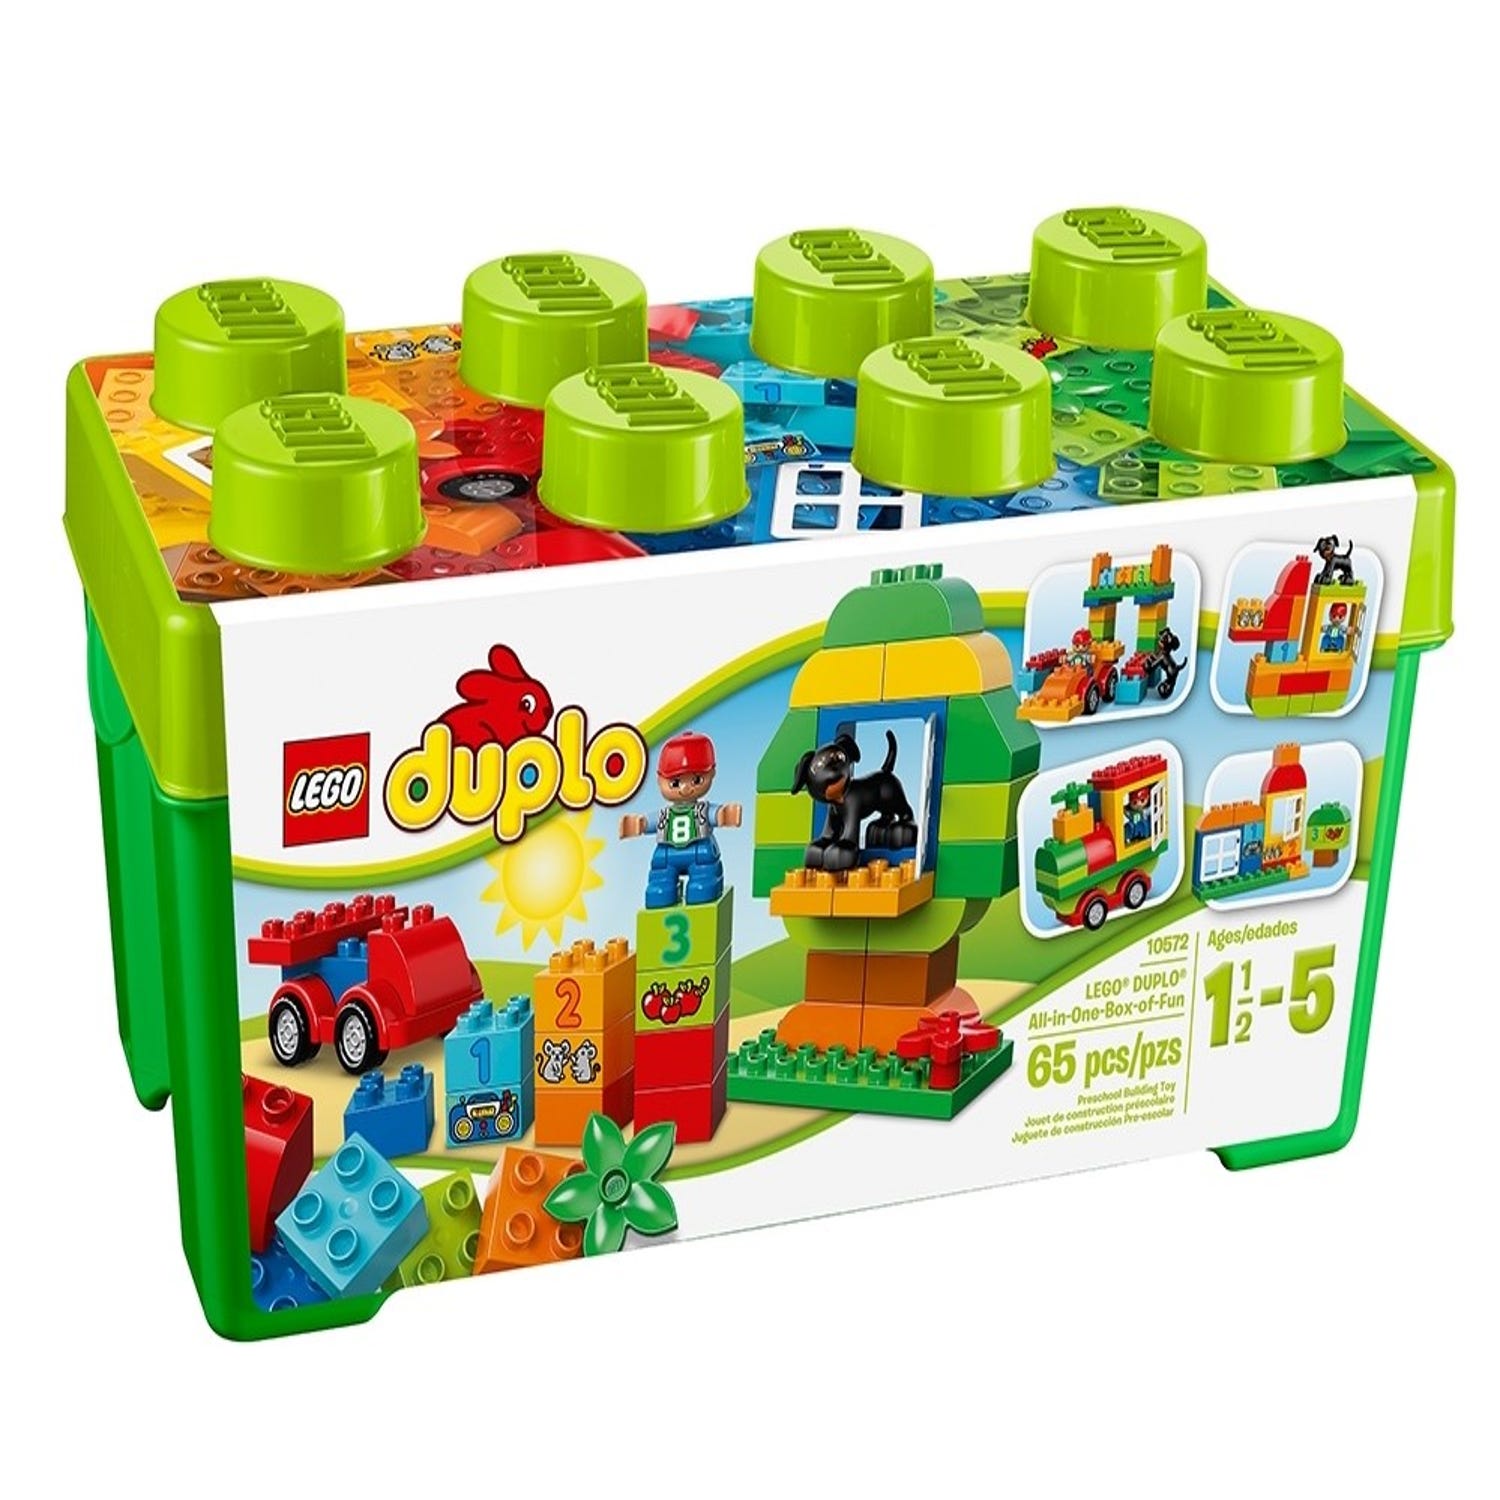 Vurdering Bløde Habitat LEGO® DUPLO® All-in-One-Box-of-Fun 10572 | DUPLO® | Buy online at the  Official LEGO® Shop US